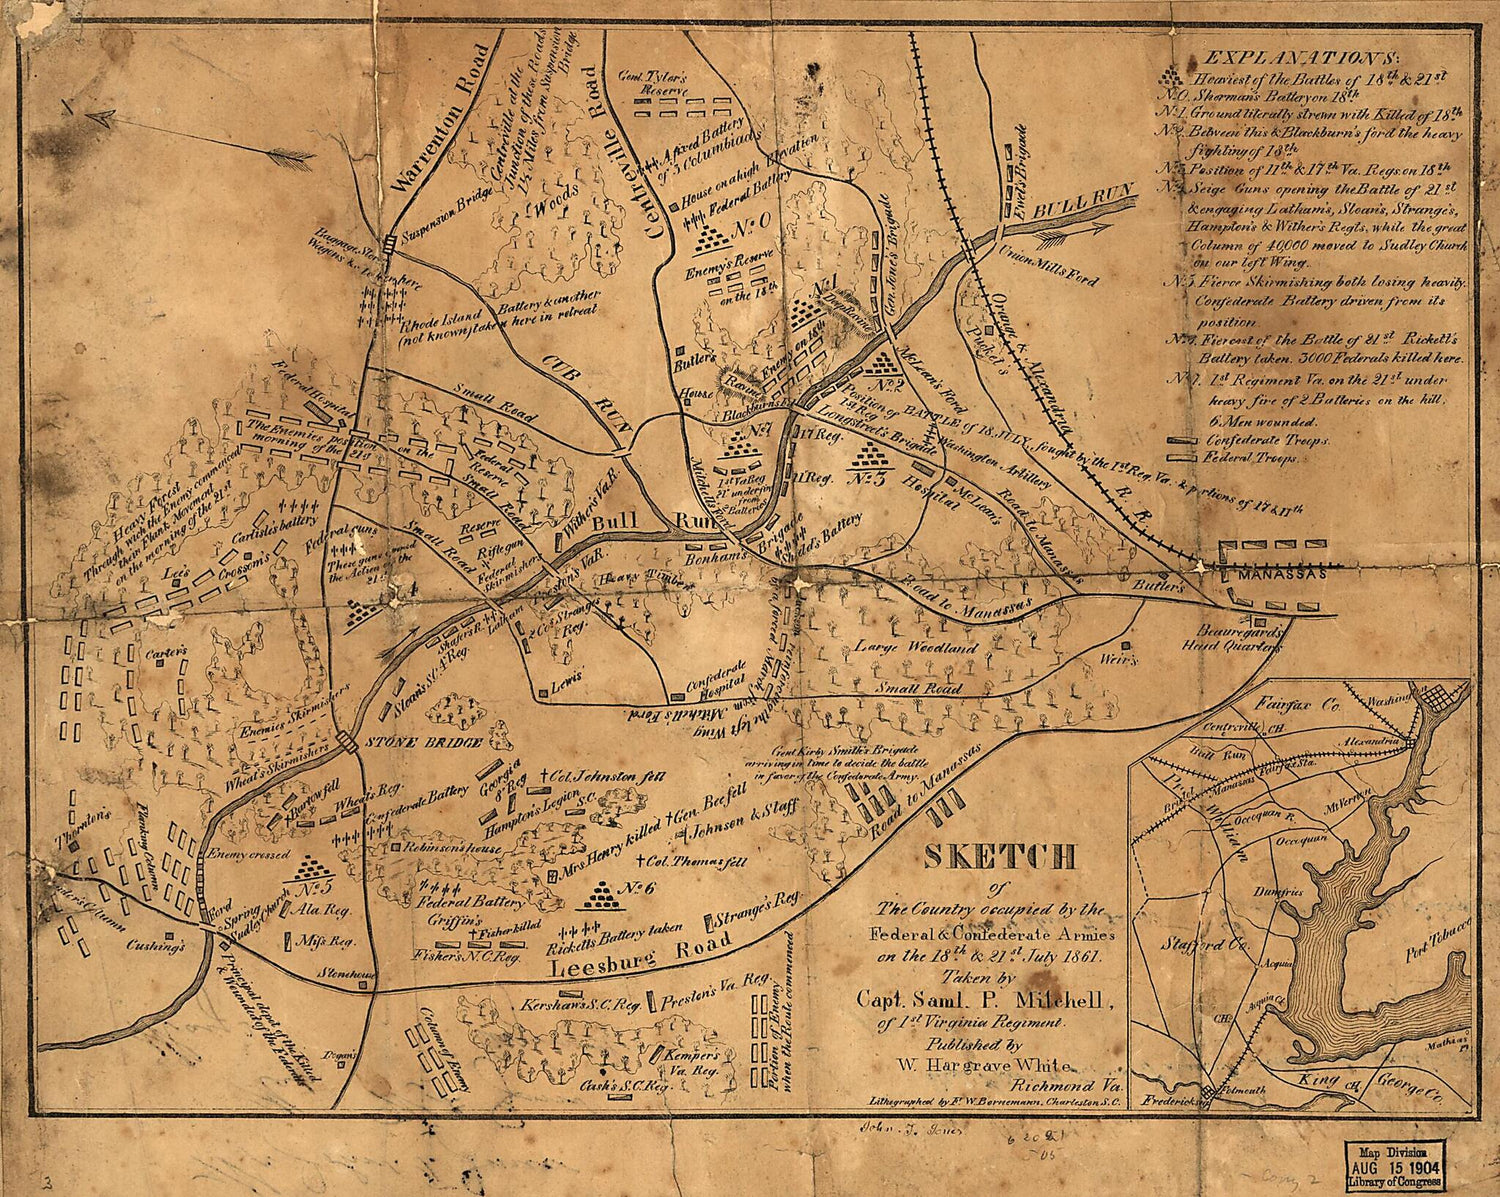 This old map of Sketch of the Country Occupied by the Federal &amp; Confederate Armies On the 18th &amp; 21st July from 1861 was created by Samuel P. Mitchell in 1861